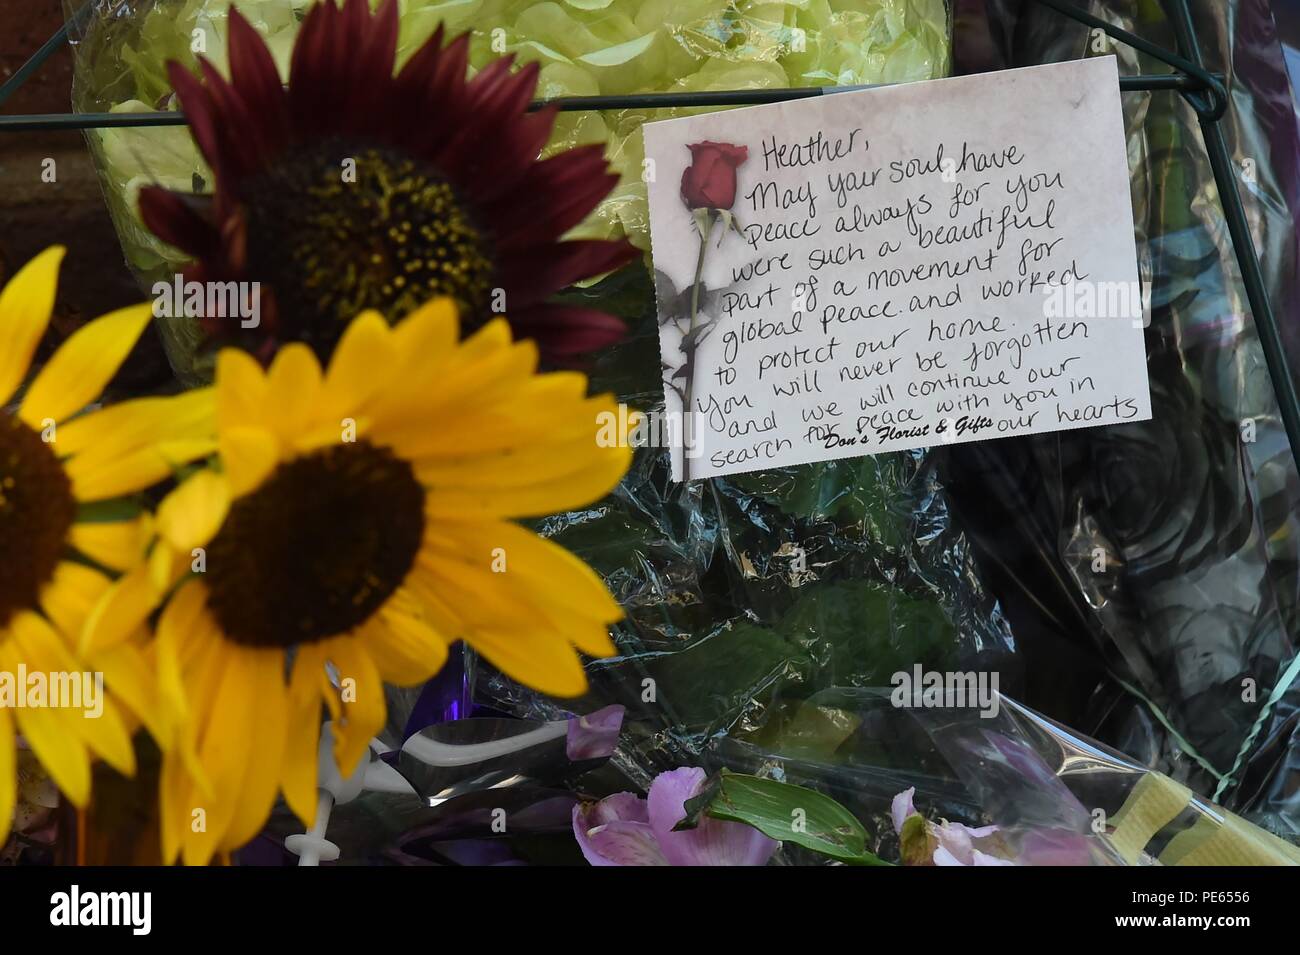 (180812) -- WASHINGTON, Aug. 12, 2018 (Xinhua) -- A condolent message is seen at the street corner where Heather Heyer was killed in Charlottesville, Virginia, the United States, on Aug. 10, 2018. A year after a white nationalist rally traumatized Charlottesville, in the U.S. state of Virginia, with riots and blood, the city is still healing from the shock. On Aug. 12, 2017, white supremacists and members of other hate groups gathered in Charlottesville for a self-styled "Unite the Right" rally to protest against the city's decision to remove a Confederate statue before clashing violently with Stock Photo